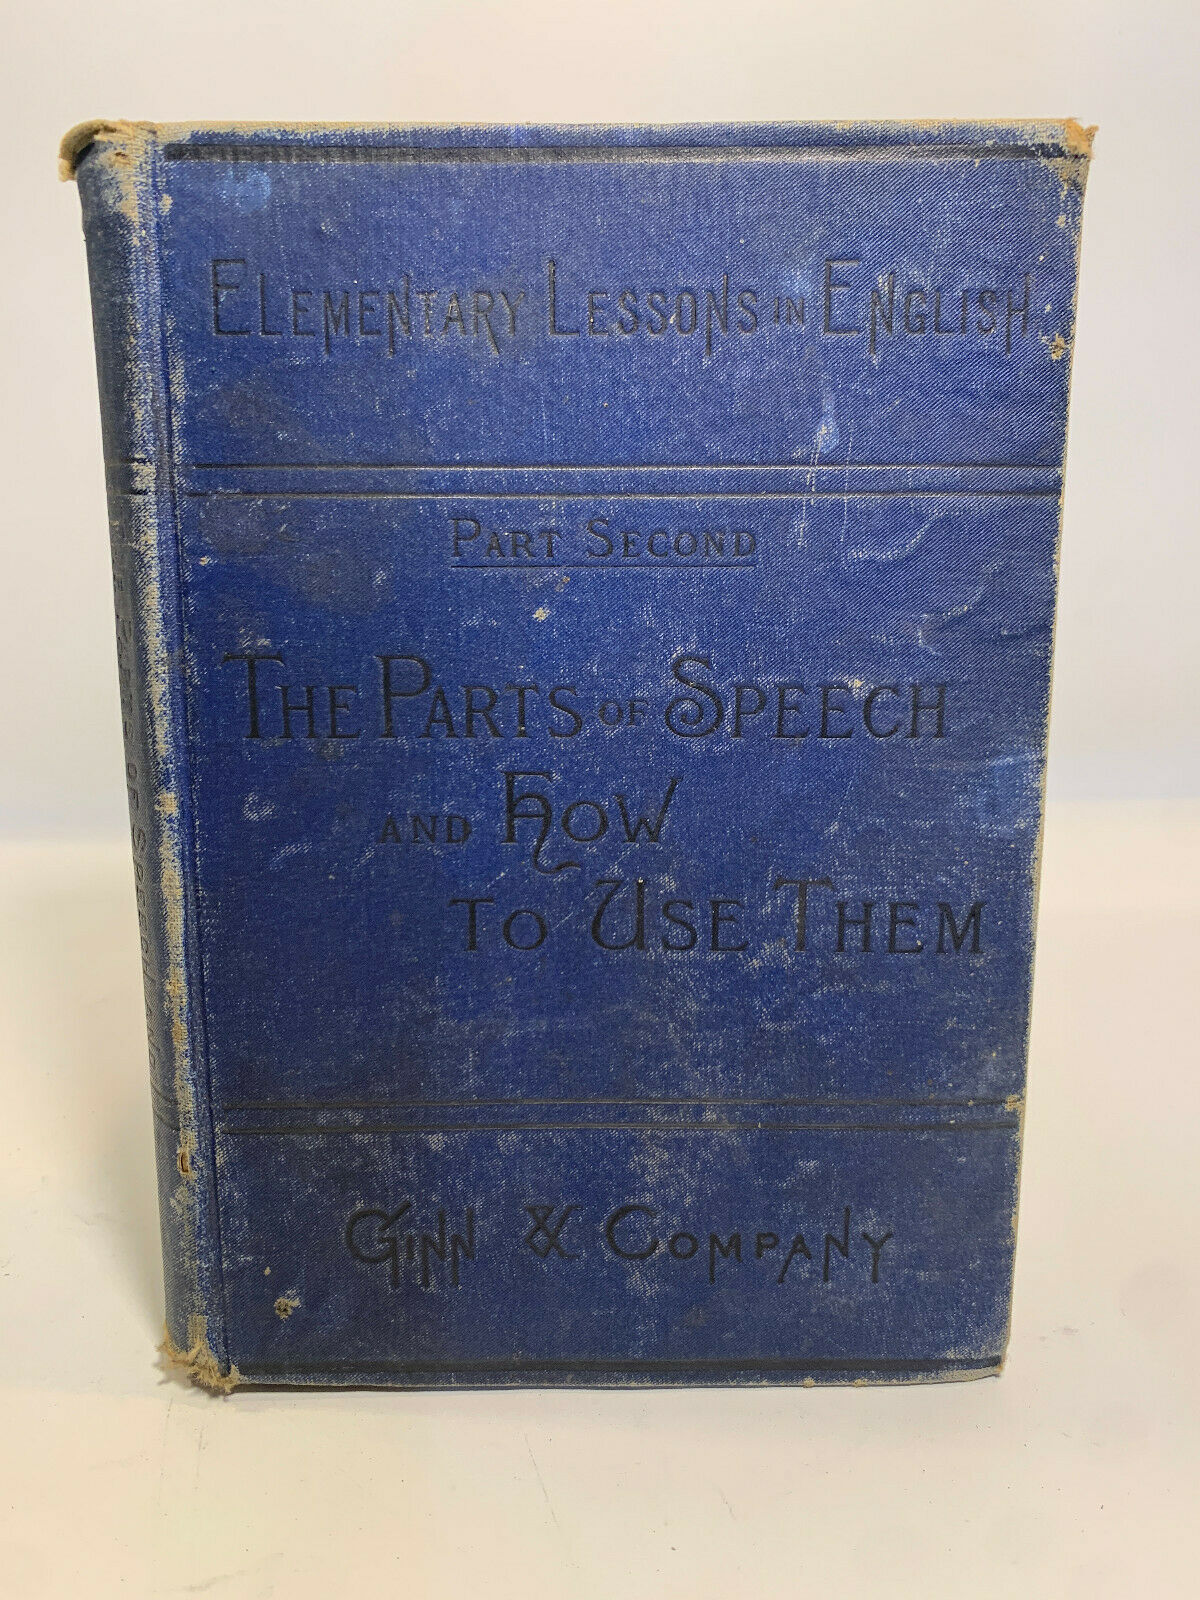 The Parts of Speech and How to Use them: Part Second - Elemtary Lessons 1886 A1